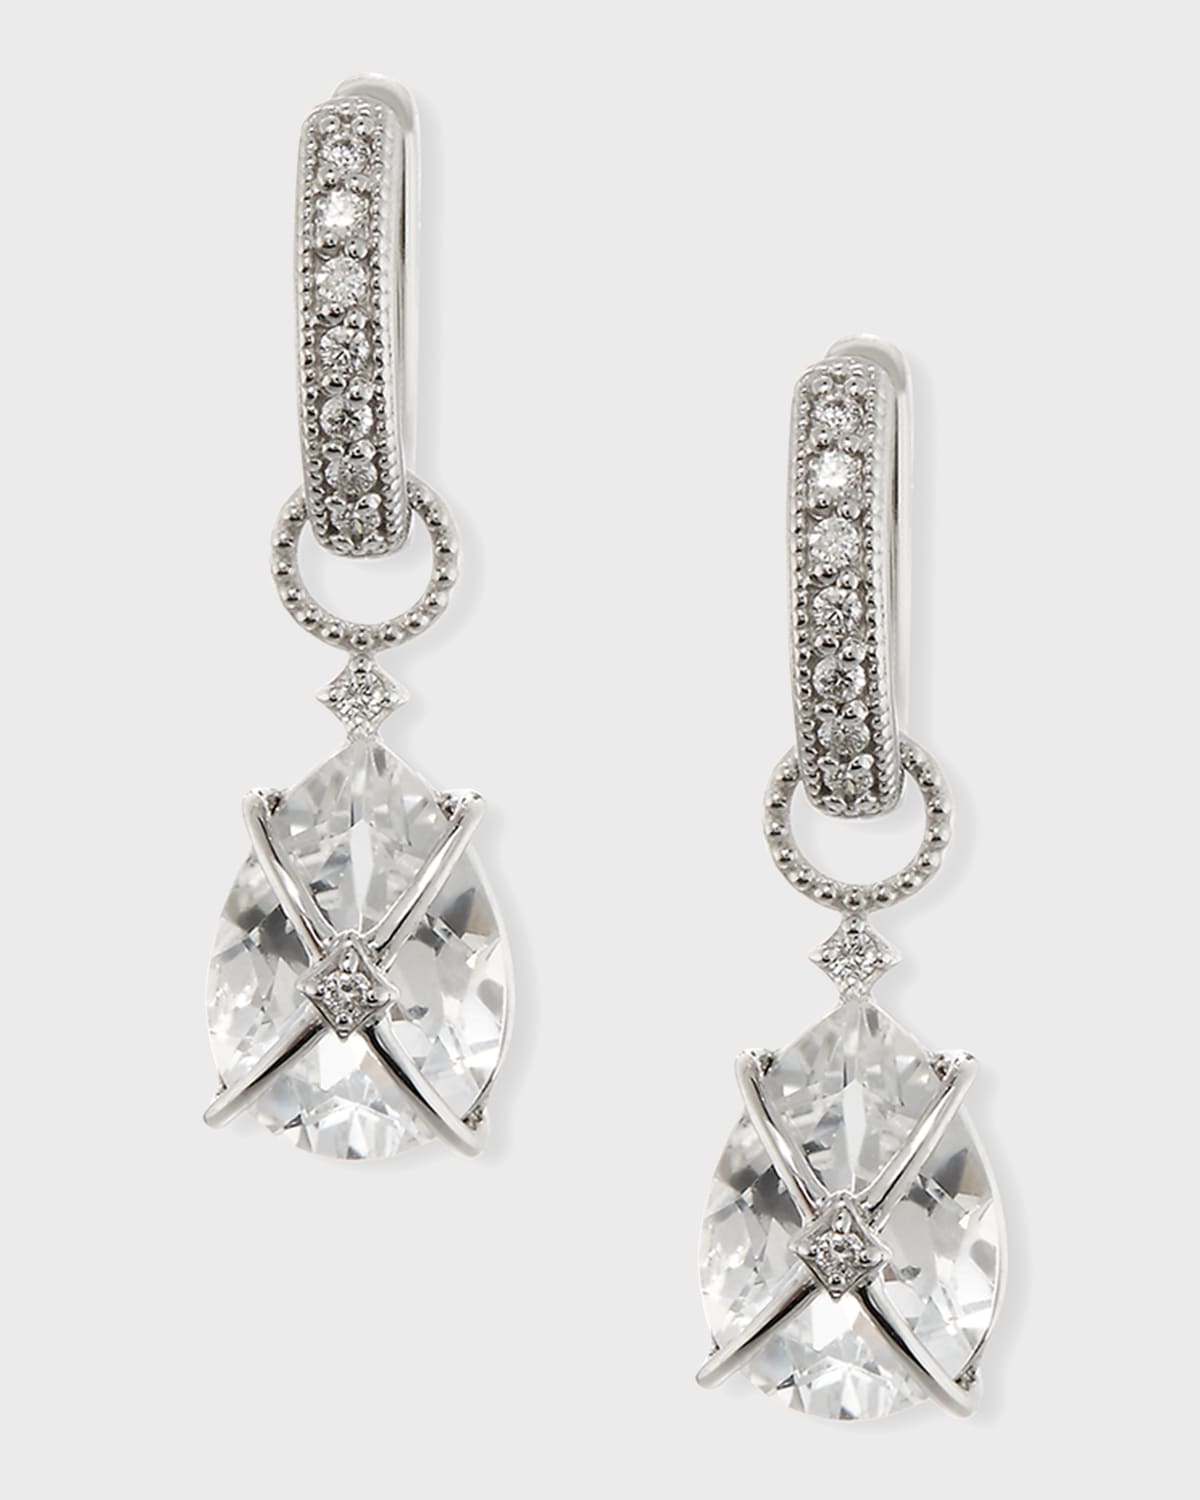 Jude Frances Tiny Crisscross Wrapped White Topaz Earring Charms with Diamonds